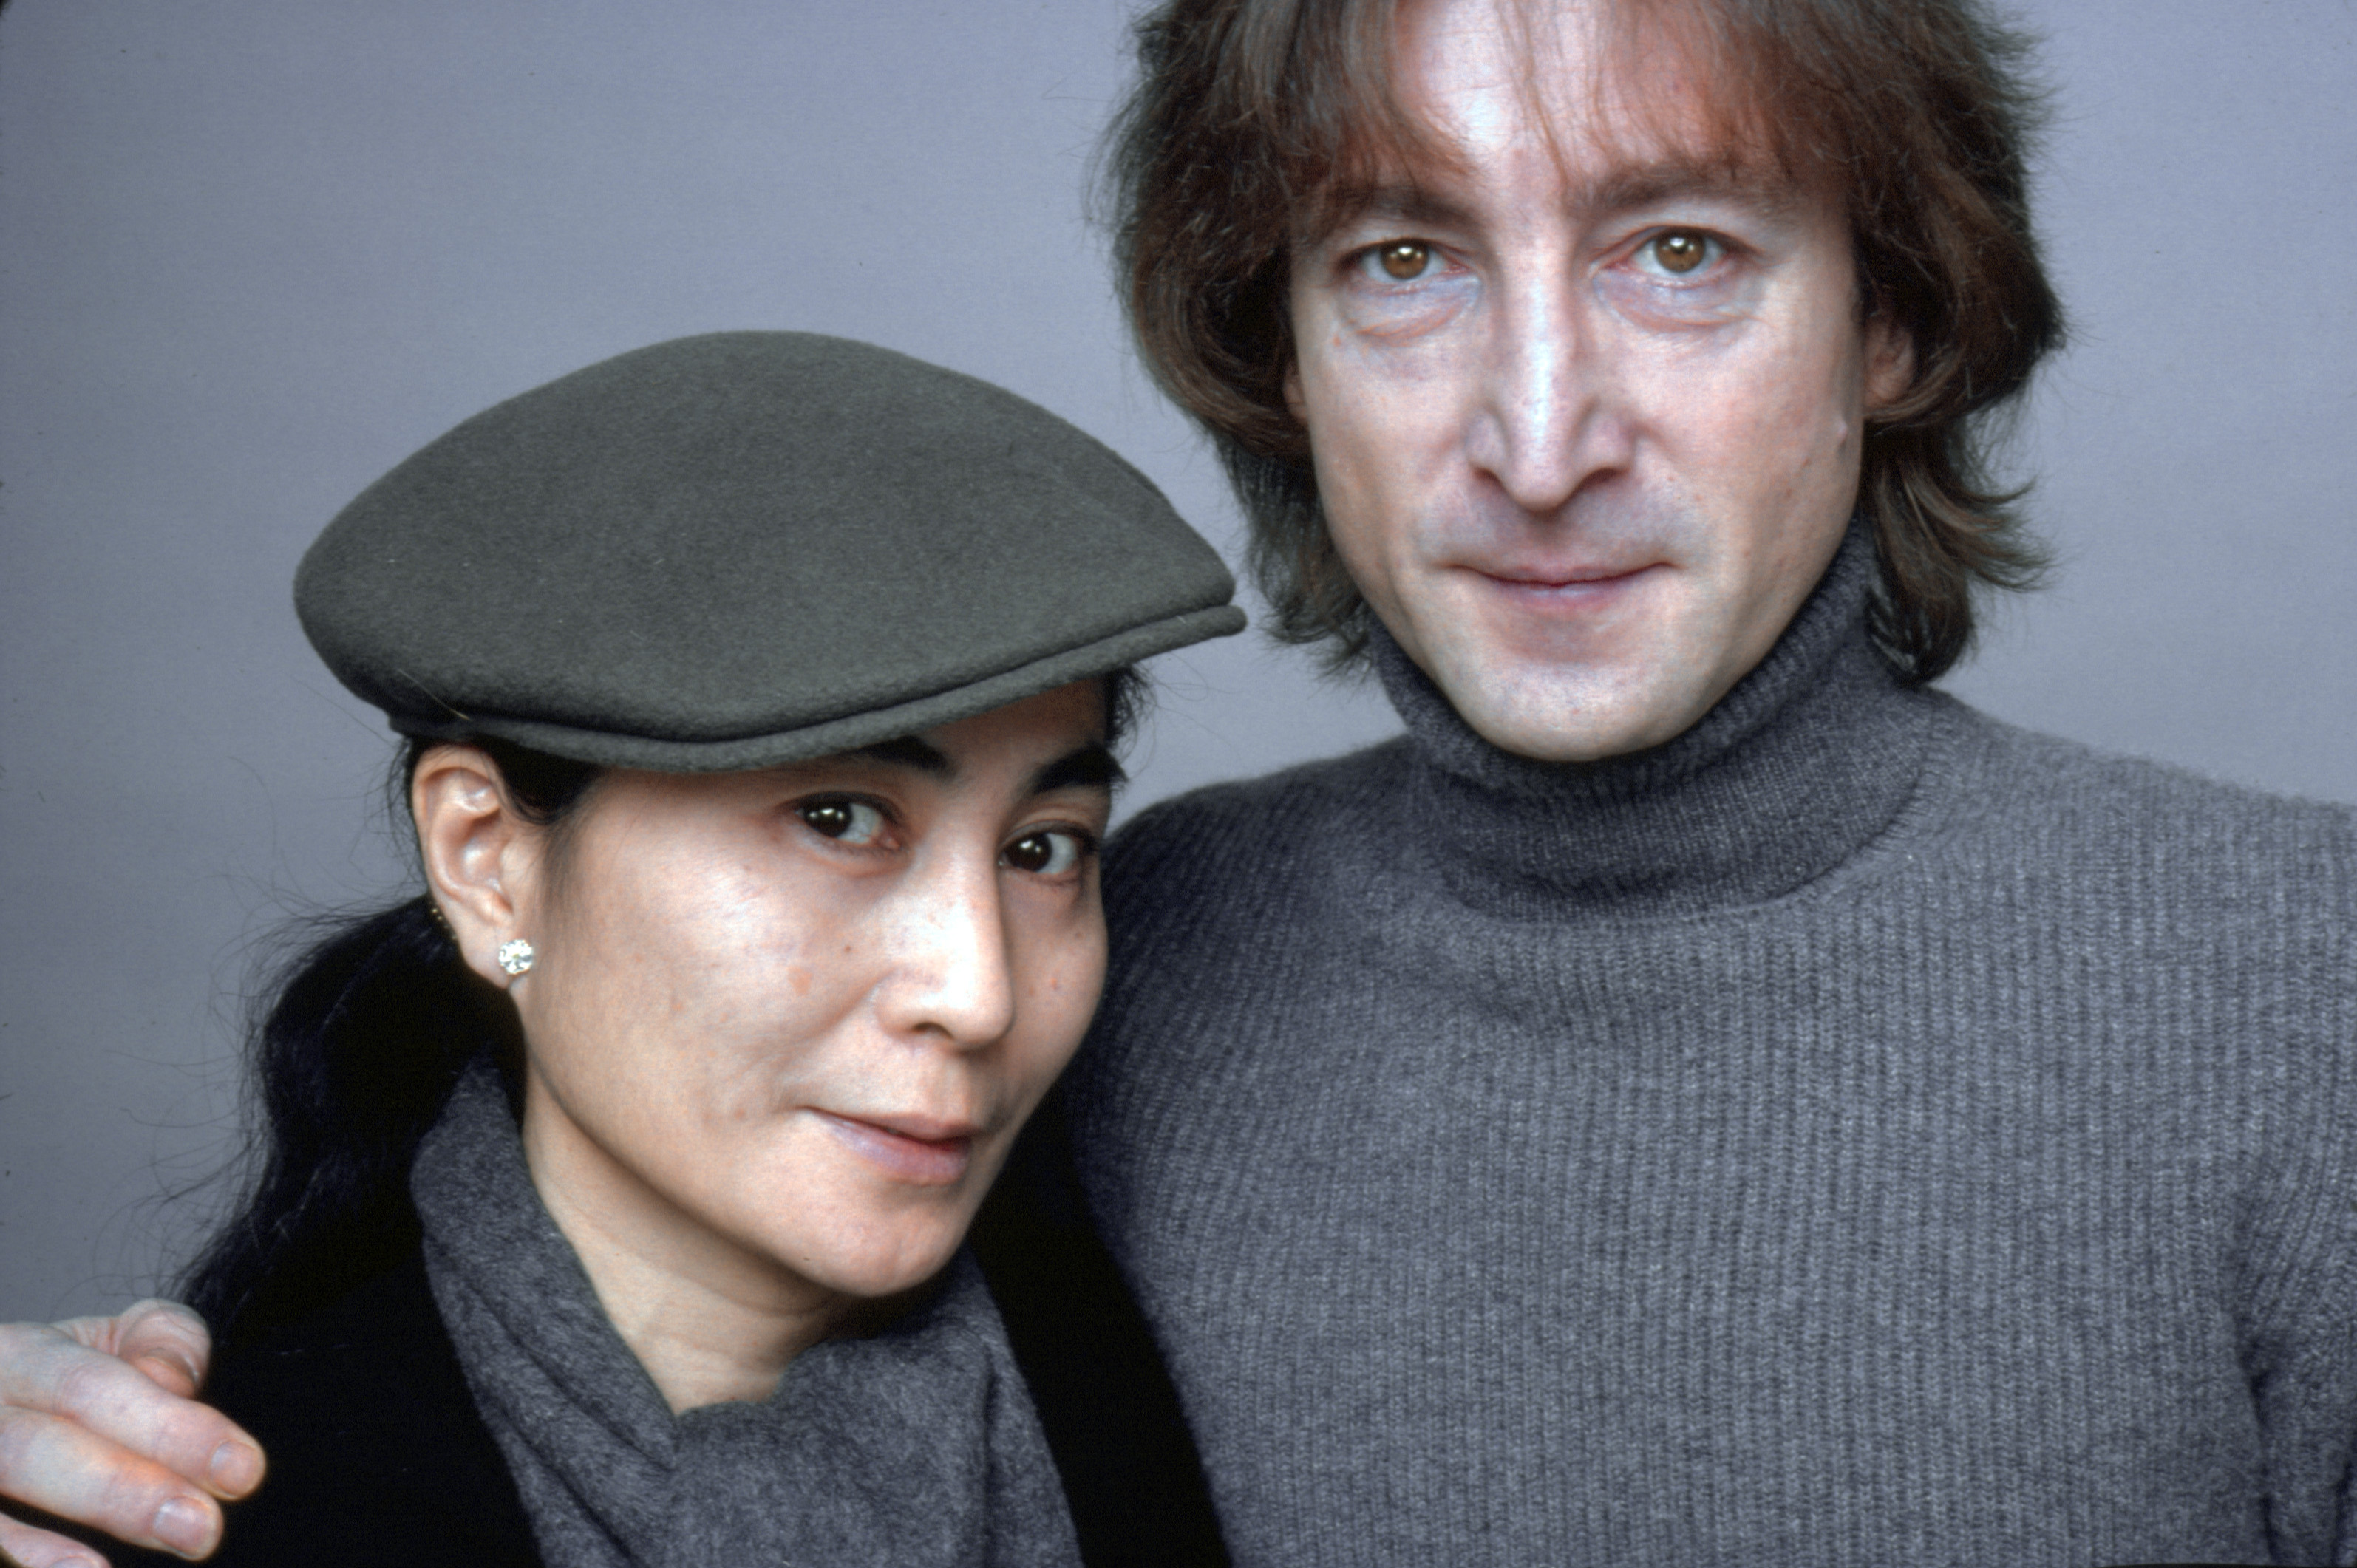 <p><span>On Dec. 8, 1980 -- 11 years after they were married -- Yoko Ono became a widow when John Lennon was shot and killed by a crazed fan of his band, The Beatles. John was Yoko's third husband; she never remarried. She has worked to continue his legacy, funding the Strawberry Fields memorial in Manhattan's Central Park, the Imagine Peace Tower in Iceland and the since-closed John Lennon Museum in Japan. This portrait of John and Yoko was taken just a month before his murder.</span></p>